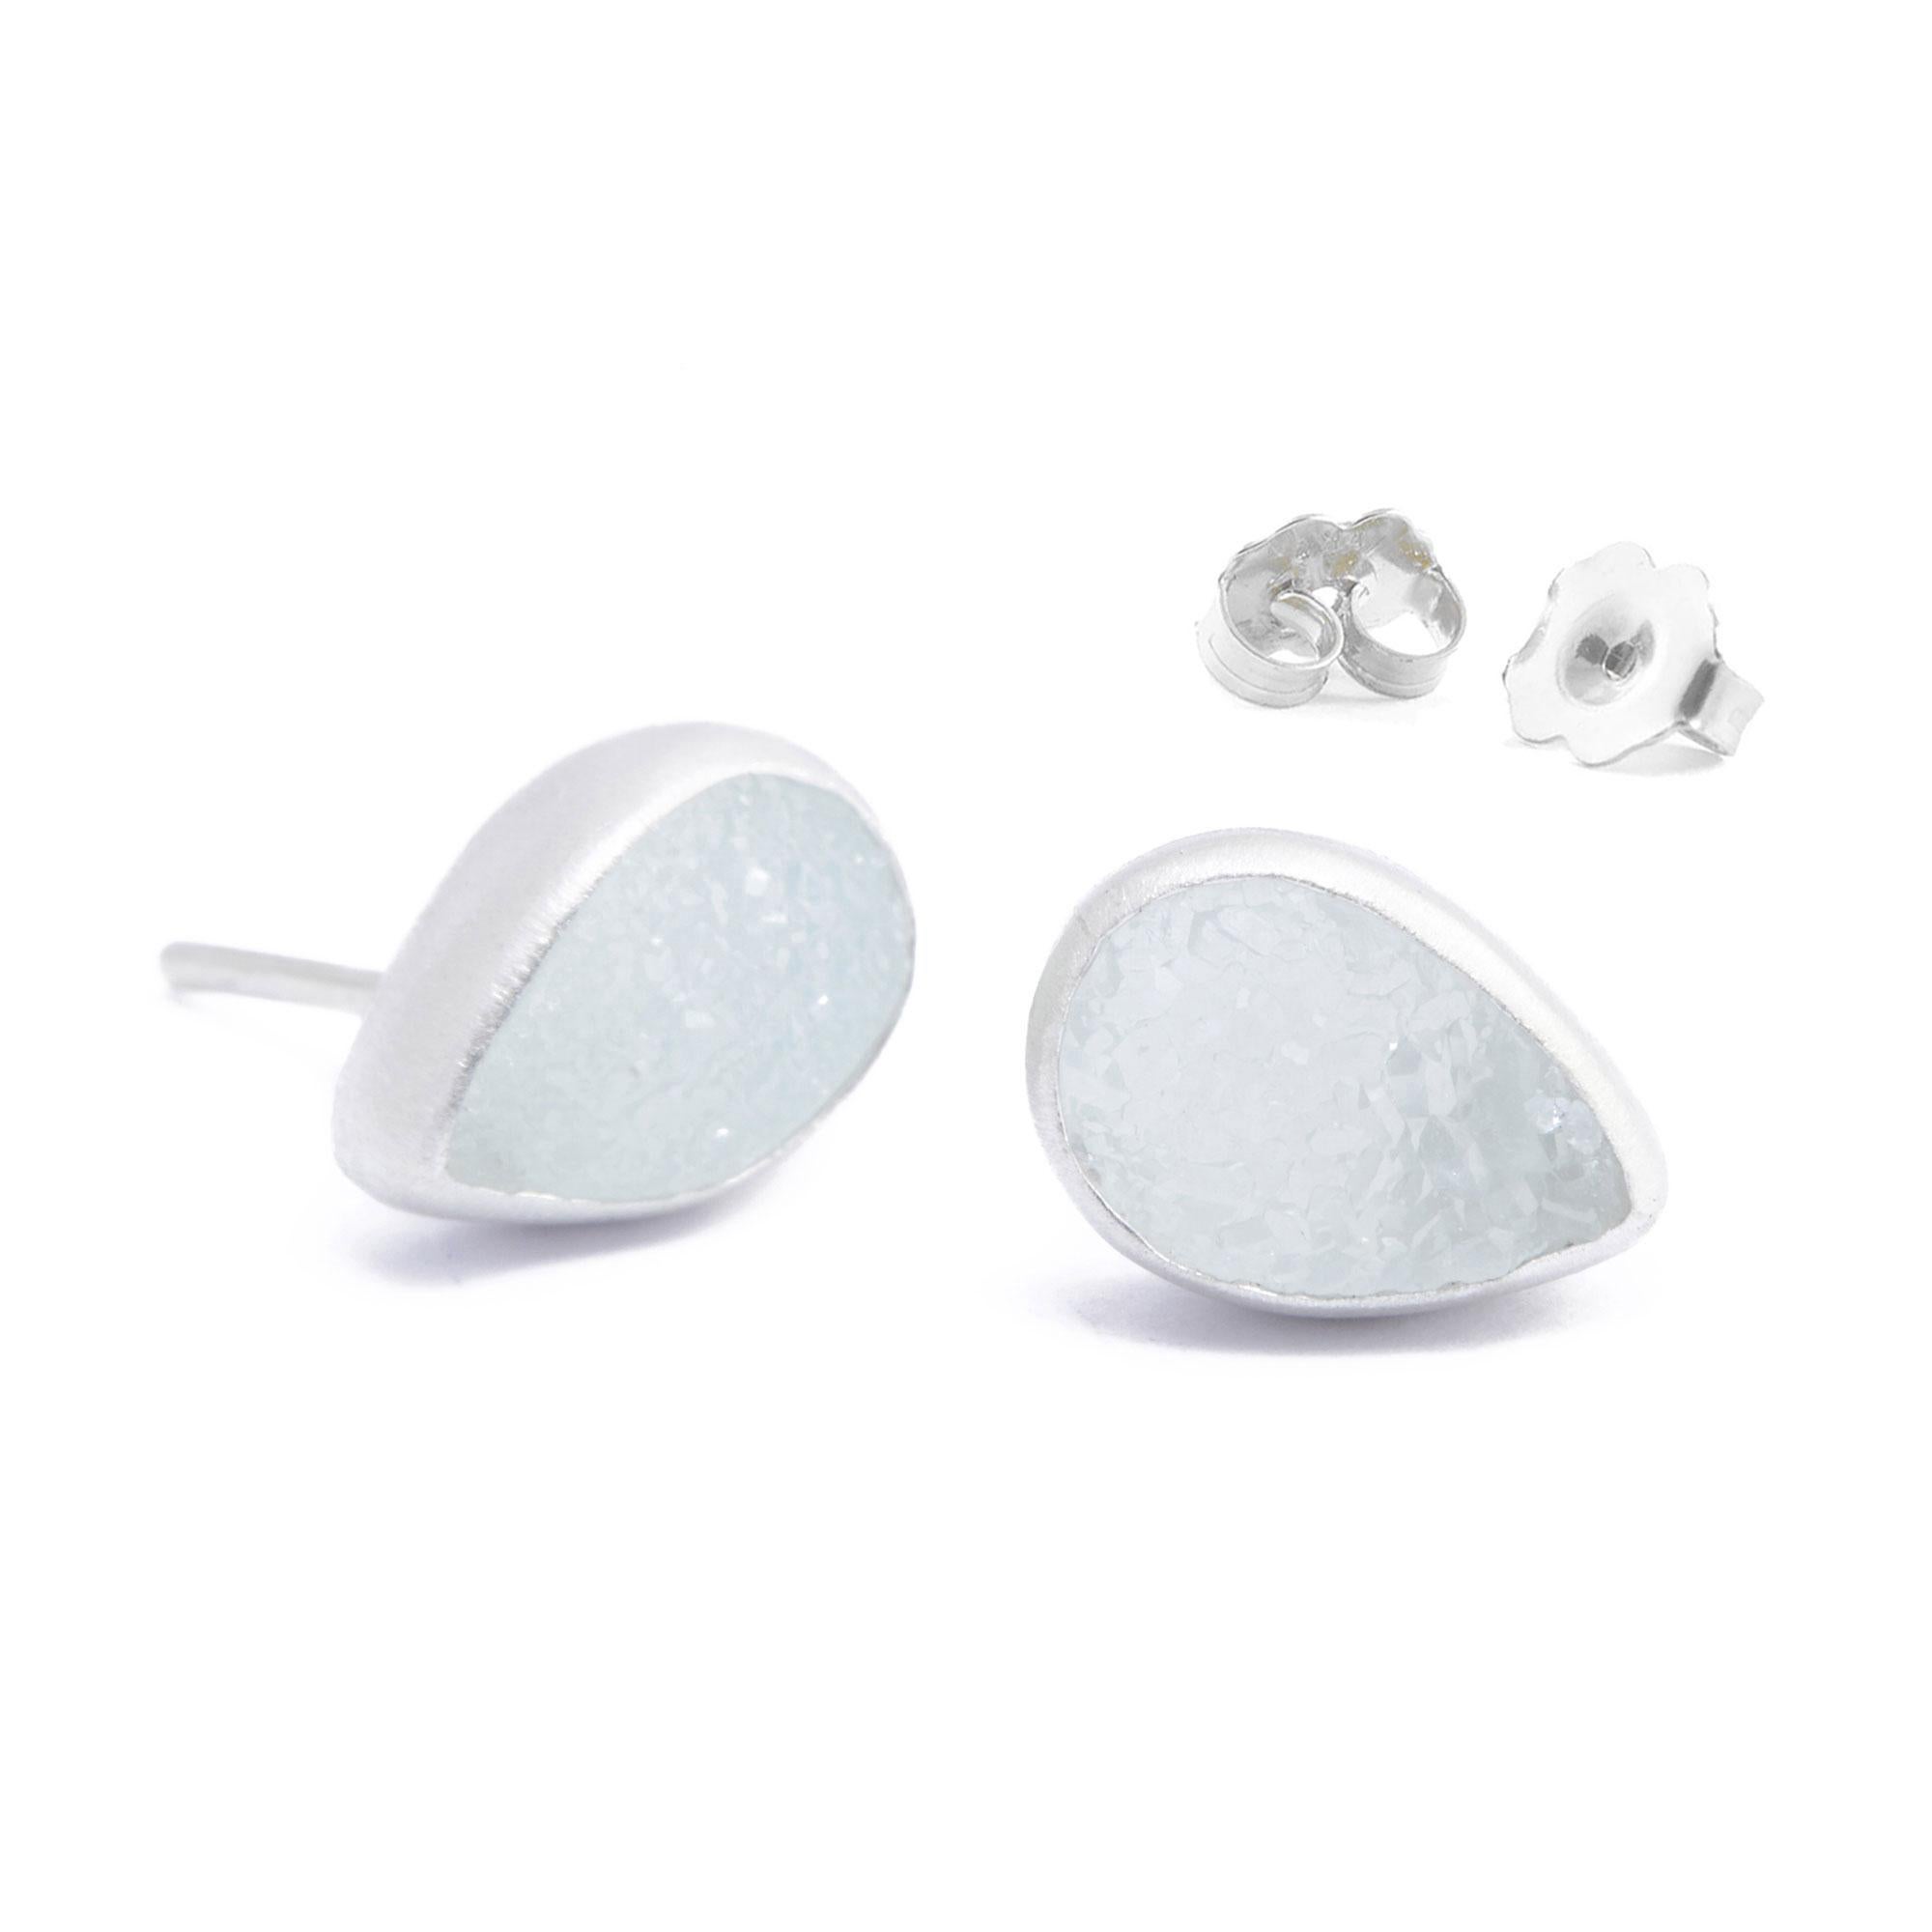 Organic and asymmetrical, and detailed with a aqumarine druzy for a bold, mysterious edge, the Adorn Petite Silver Studs go with everything in your closet.
Nina Nguyen Design's patent-pending earrings have an element on the back of the stud or charm